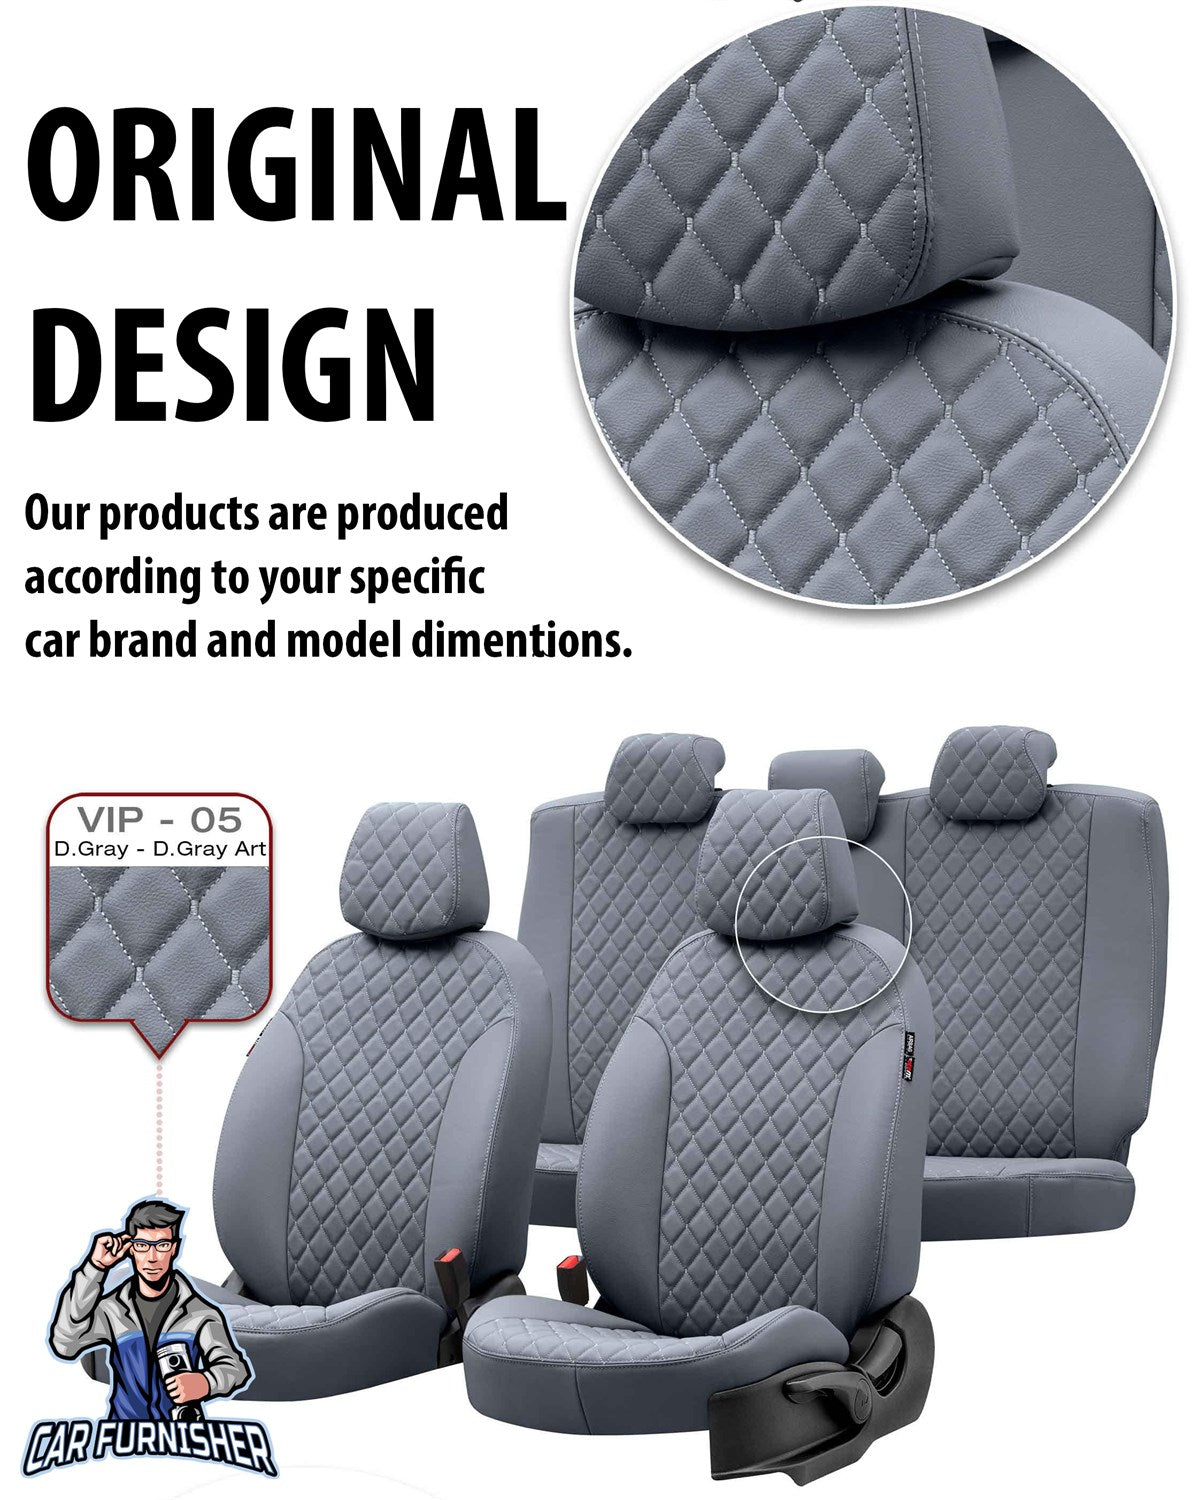 Toyota Hilux Seat Cover Madrid Leather Design Smoked Leather